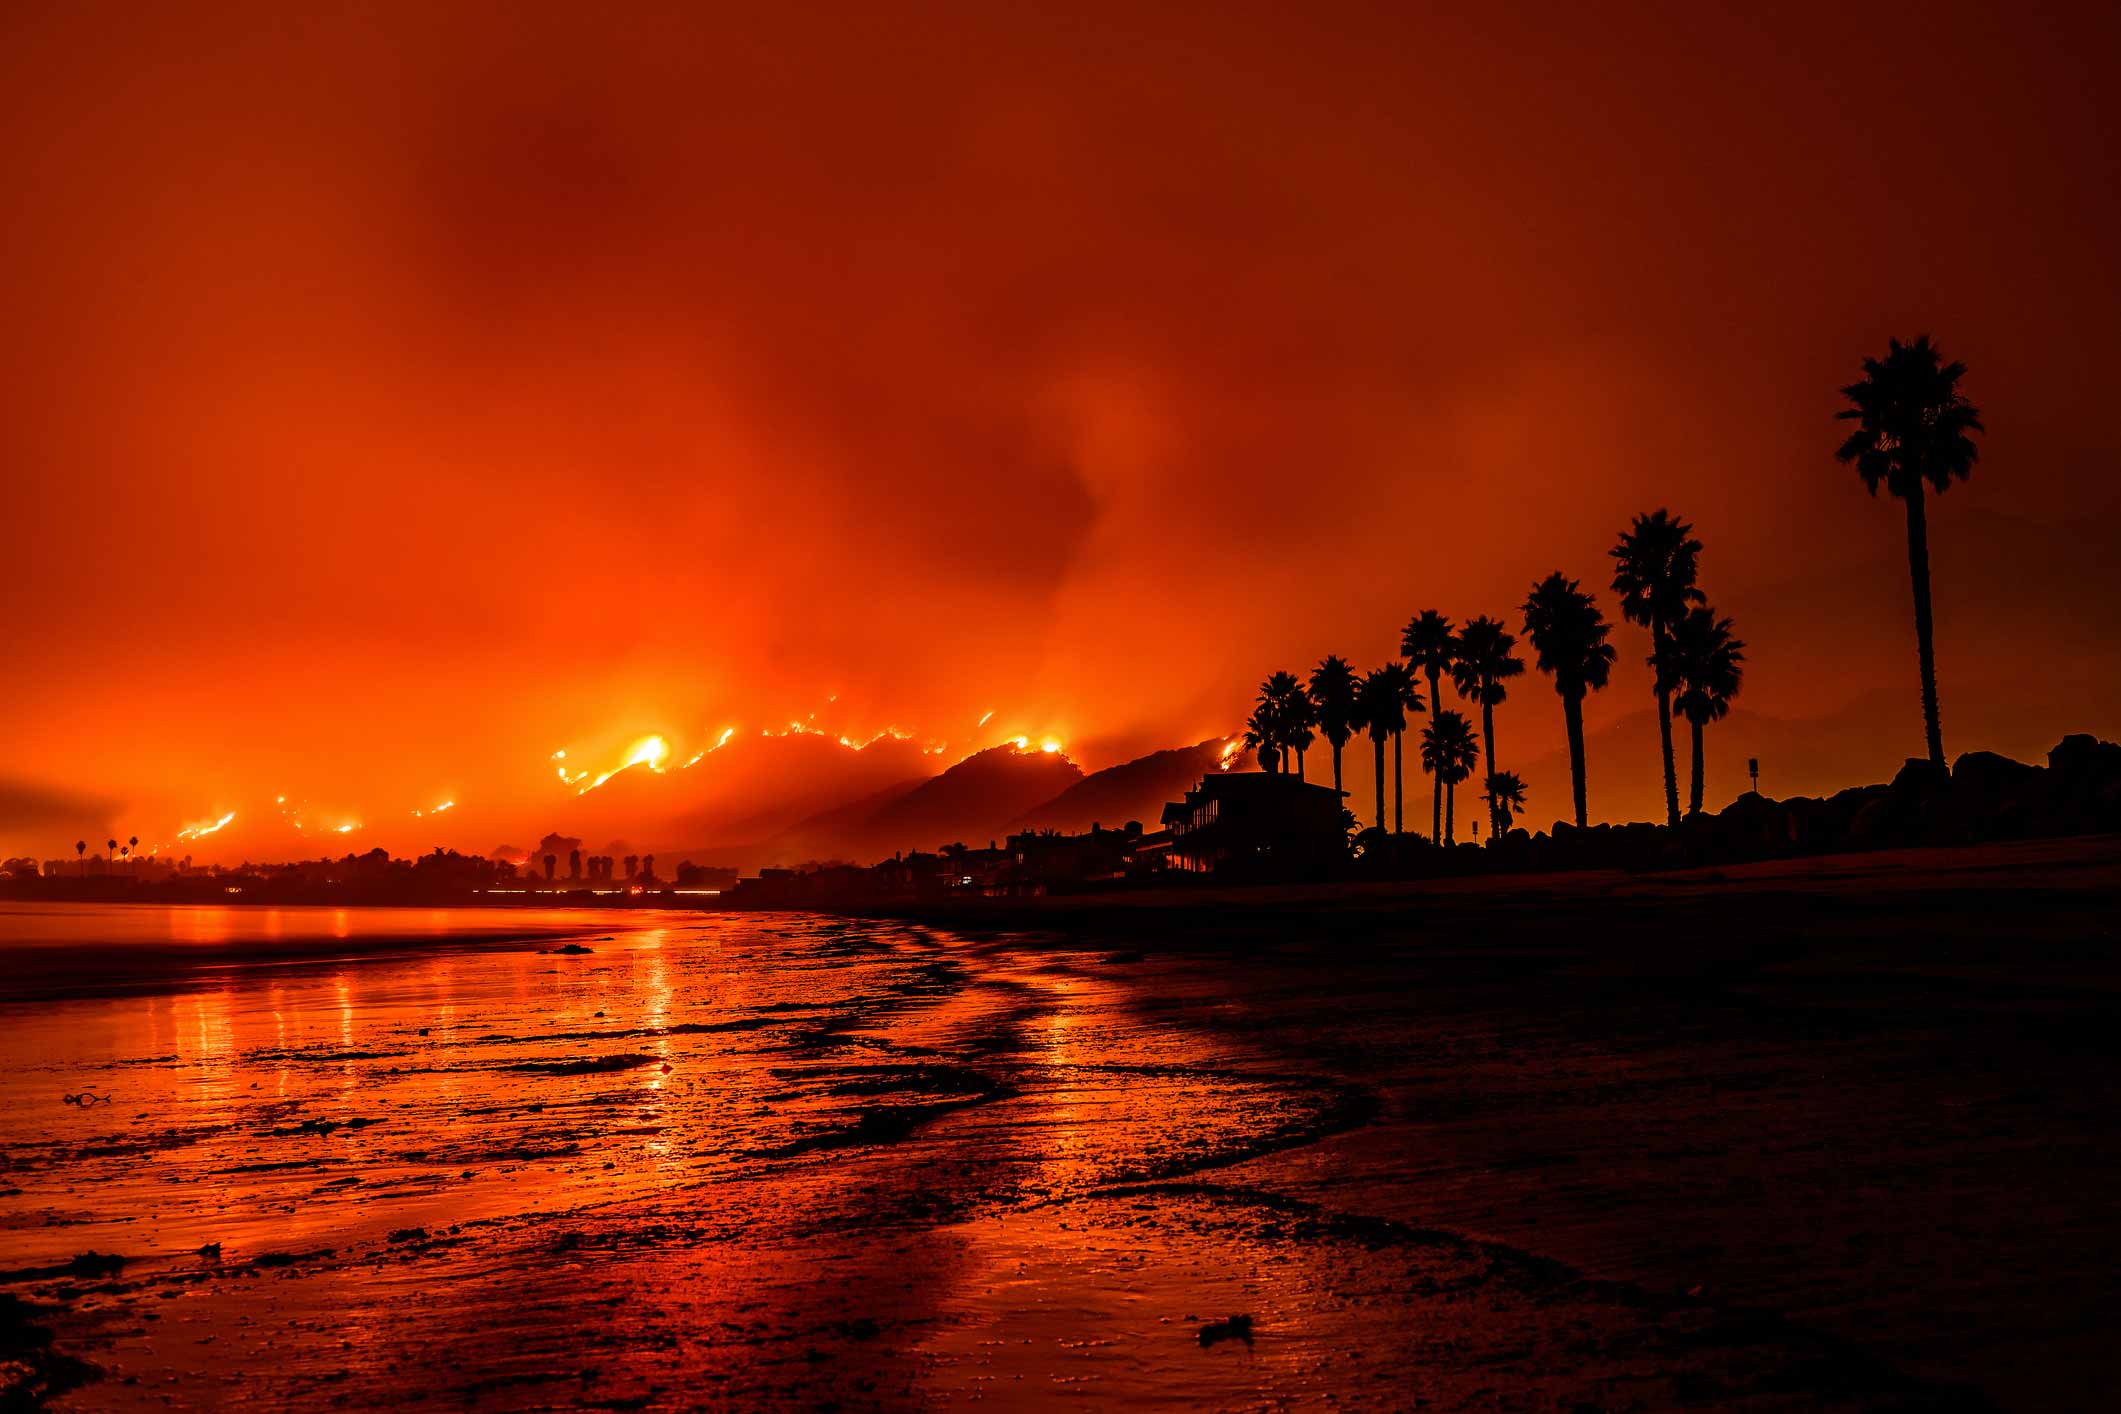 Wildfires Are Spreading Quickly, So What the ‘Devil’ Can We Do About It?